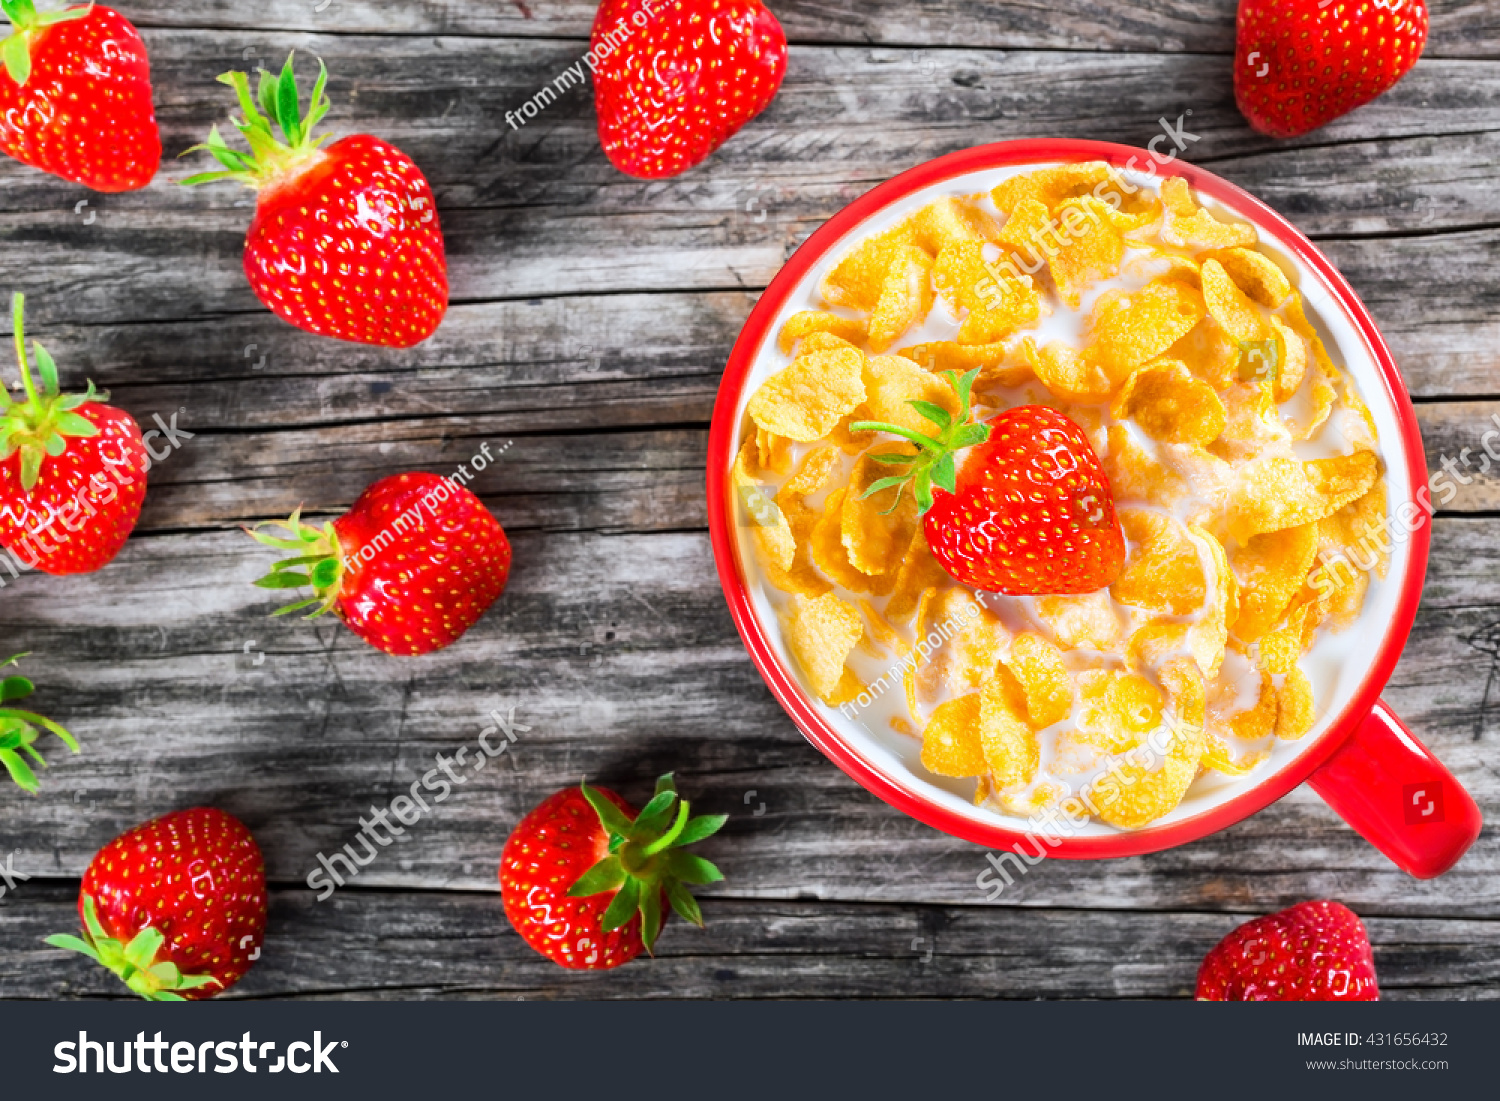 corn flakes with milk and strawberry in a red cup on an old rustic table, close-up, top view  #431656432